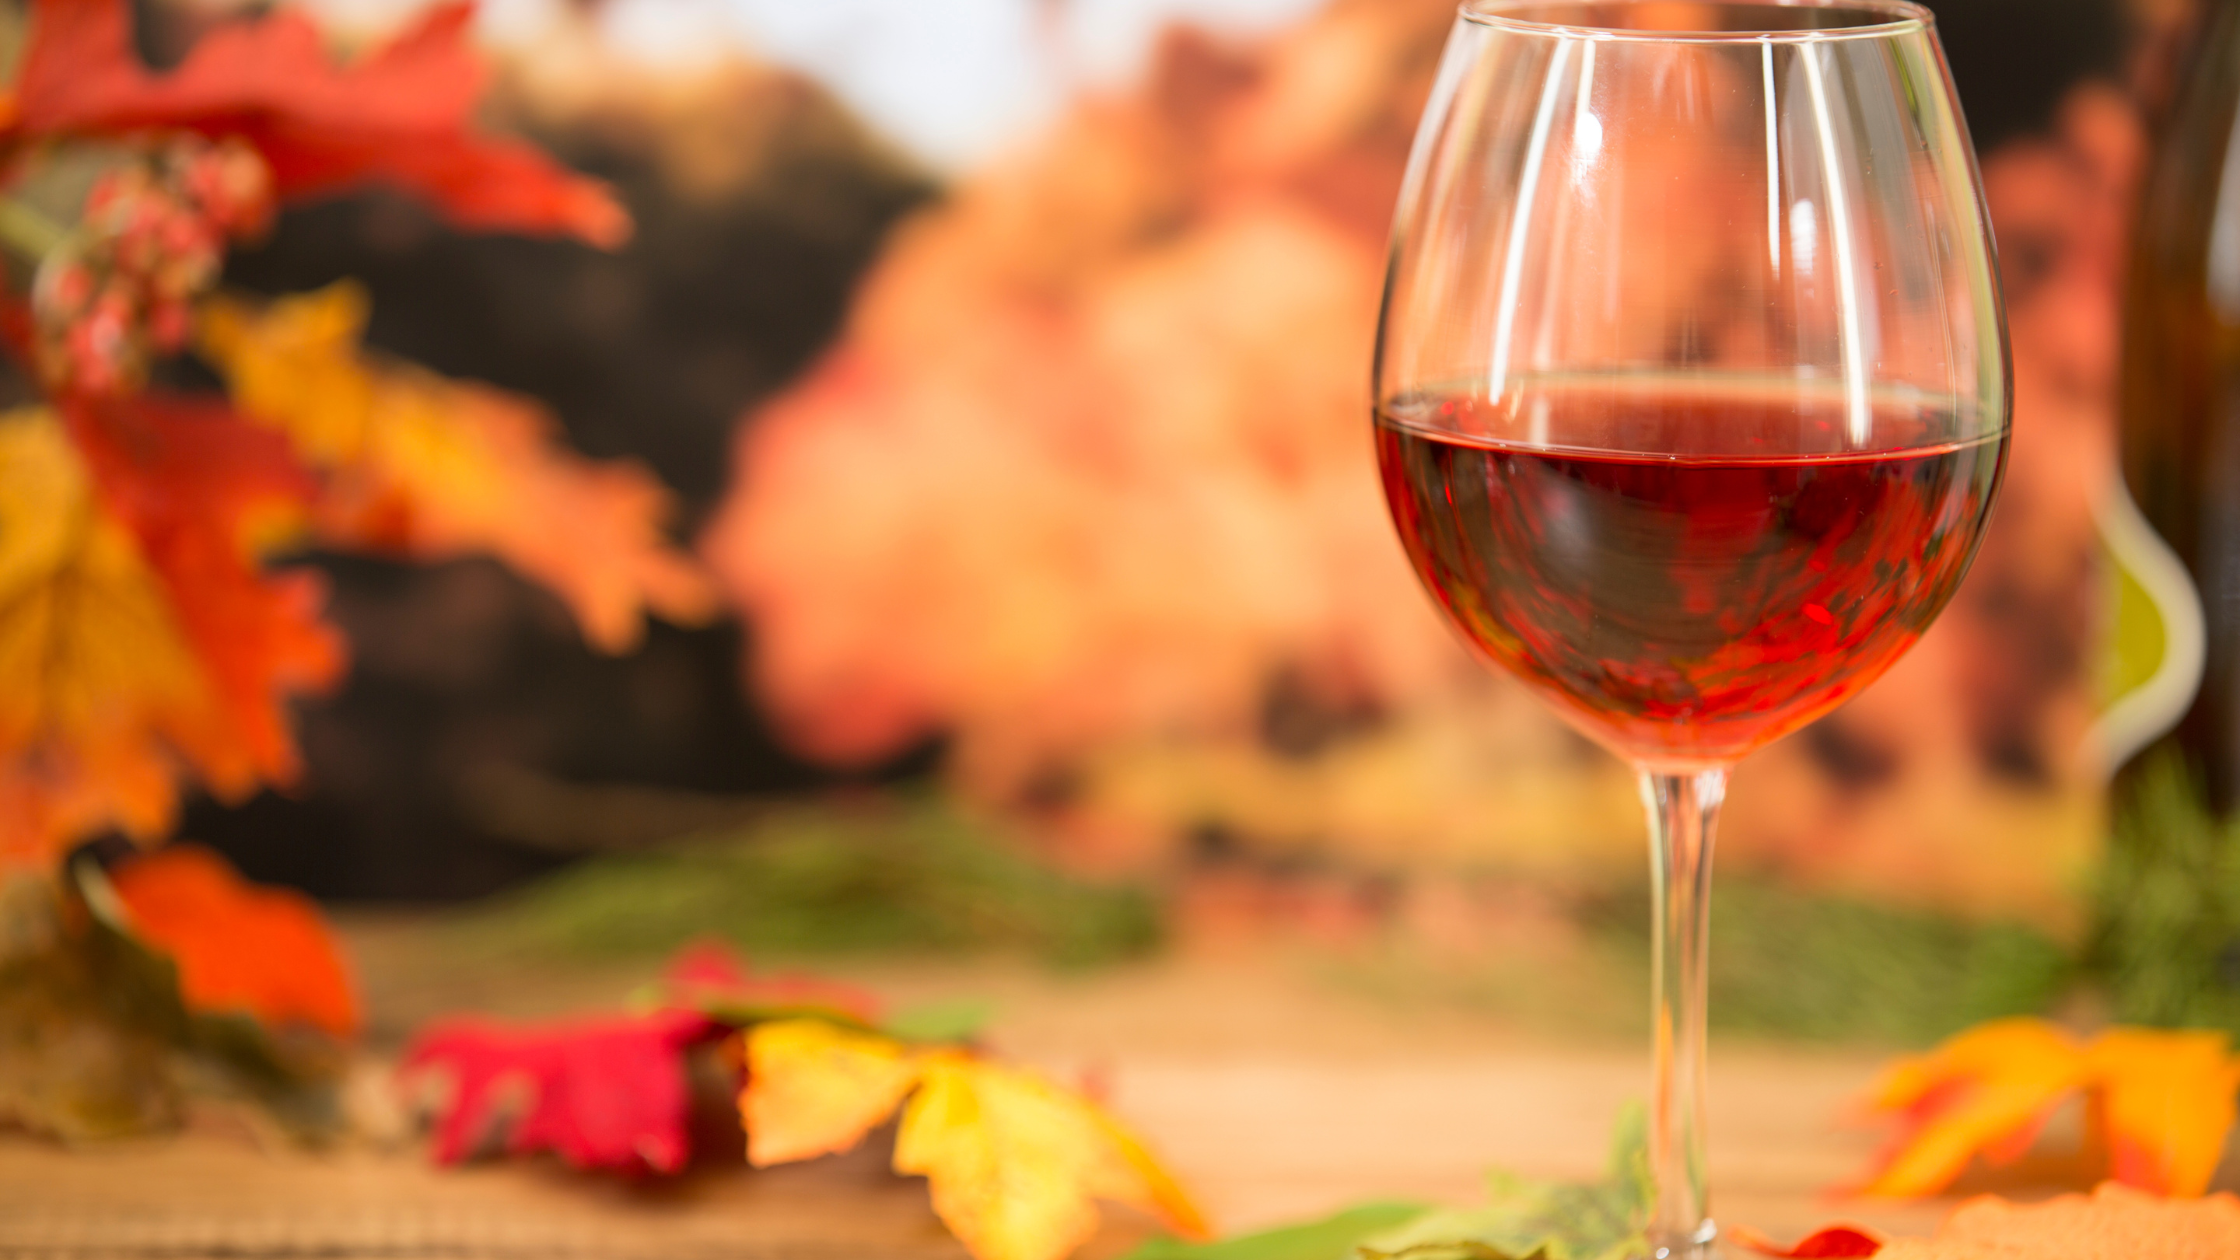 FALL background, glass of red wine